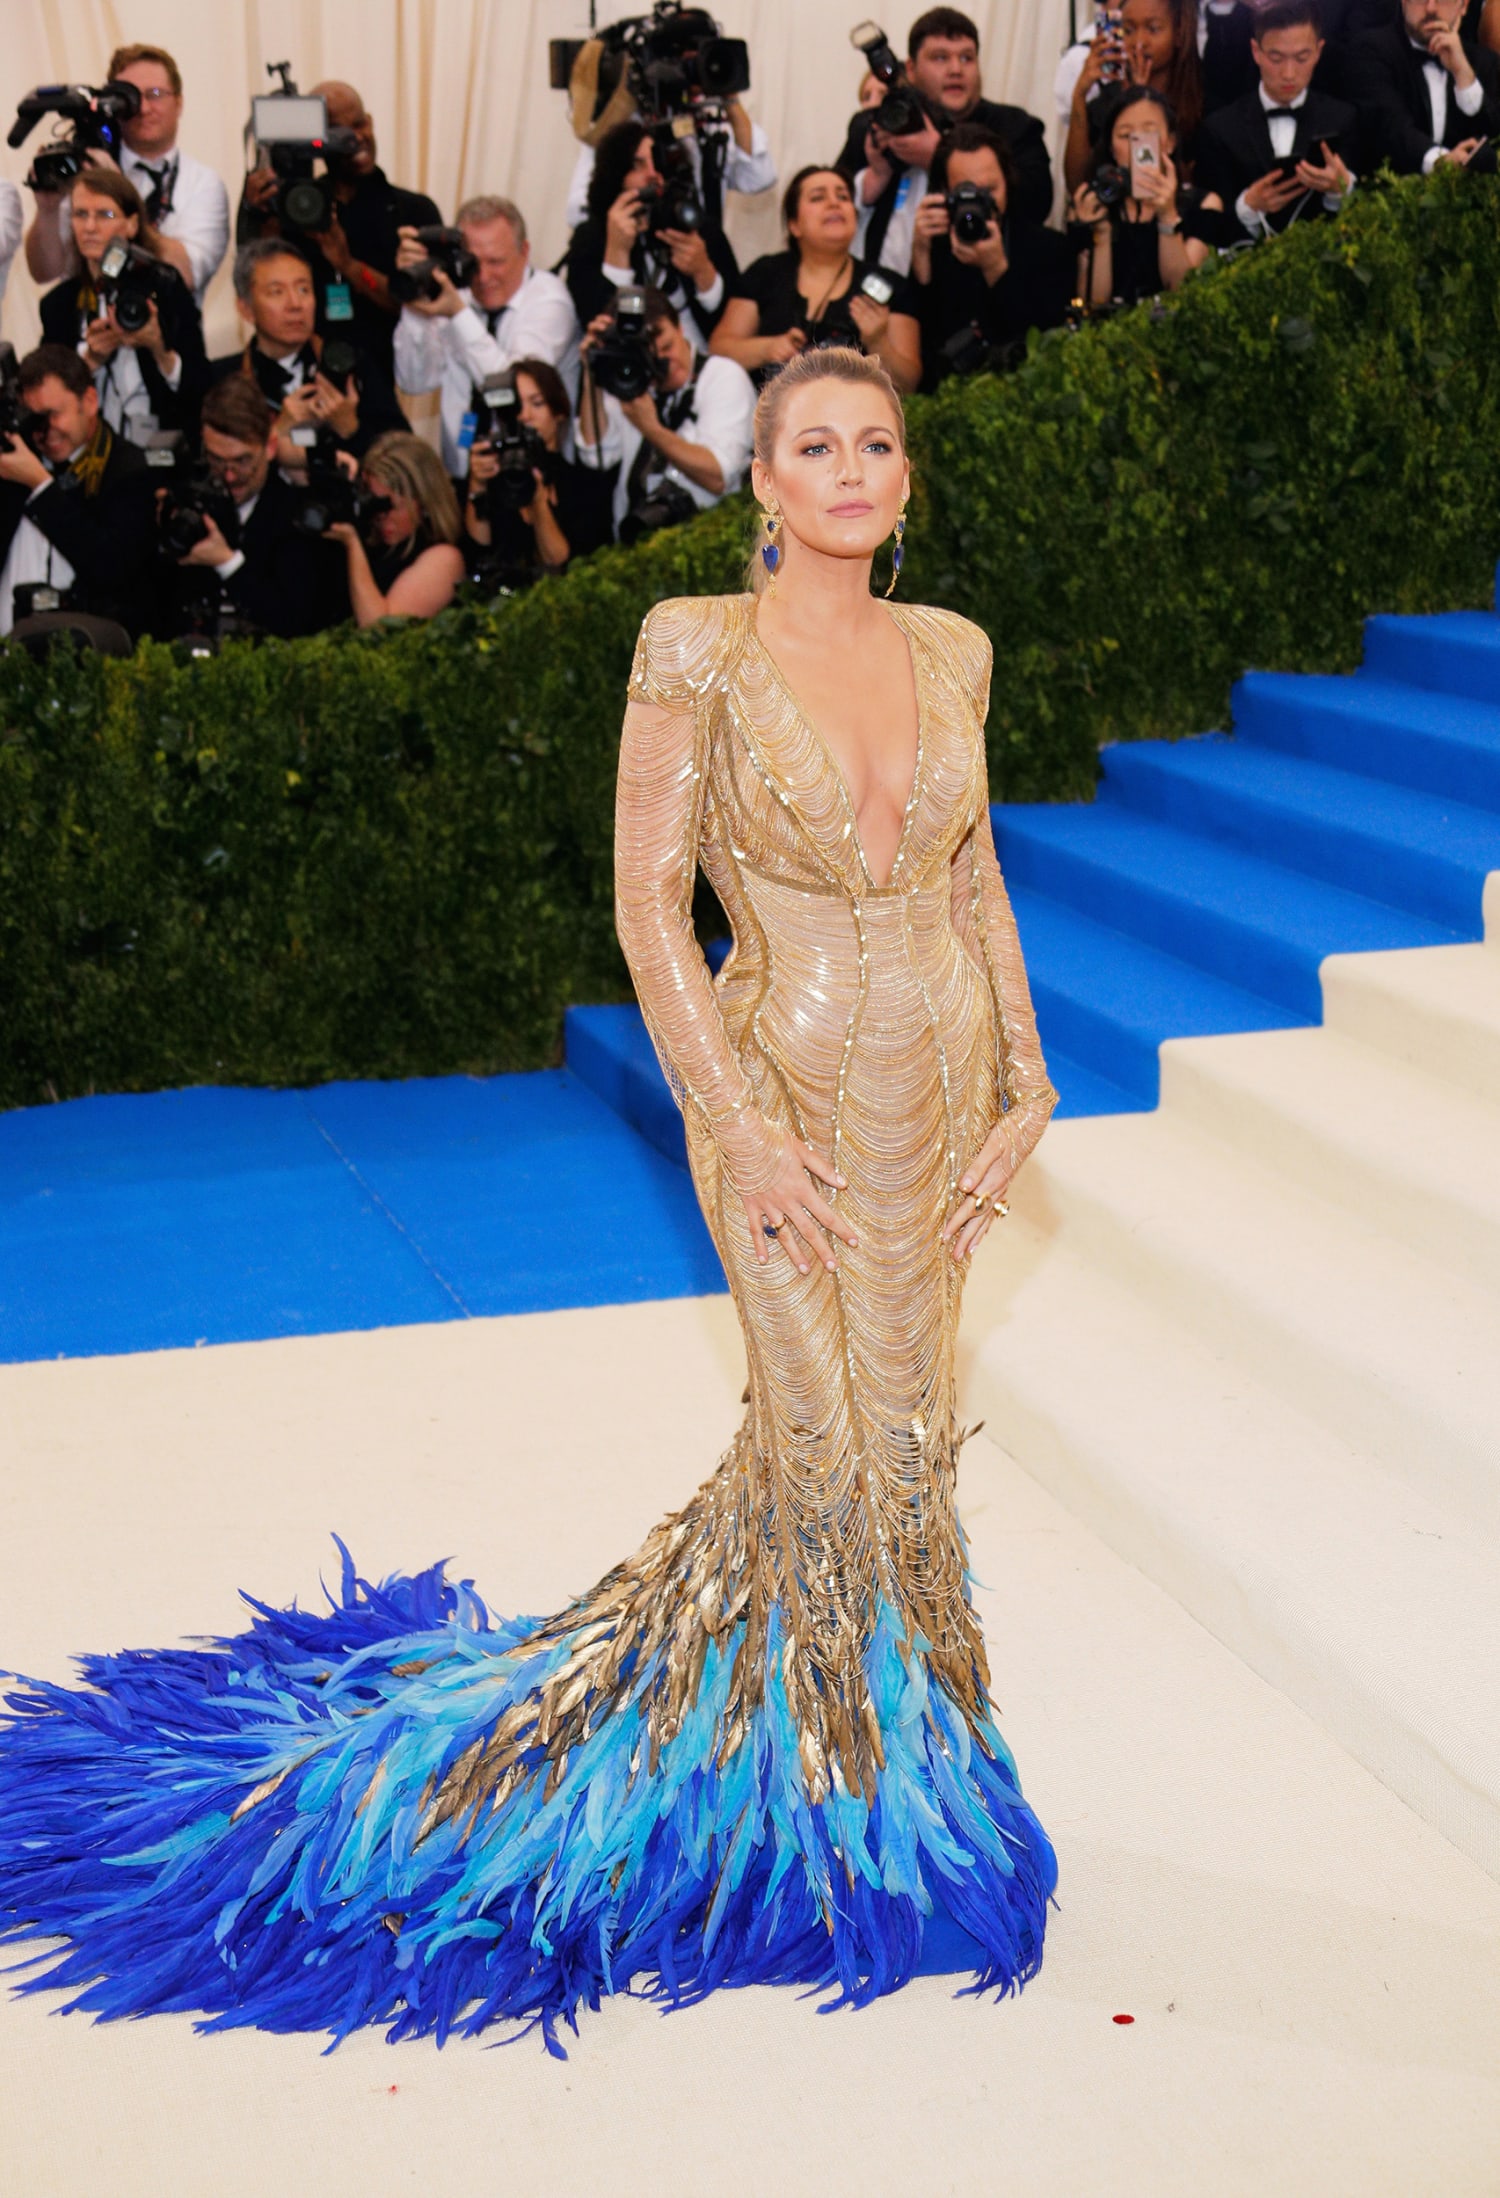 See Blake Lively's Most Iconic Met Gala Looks Over the Years